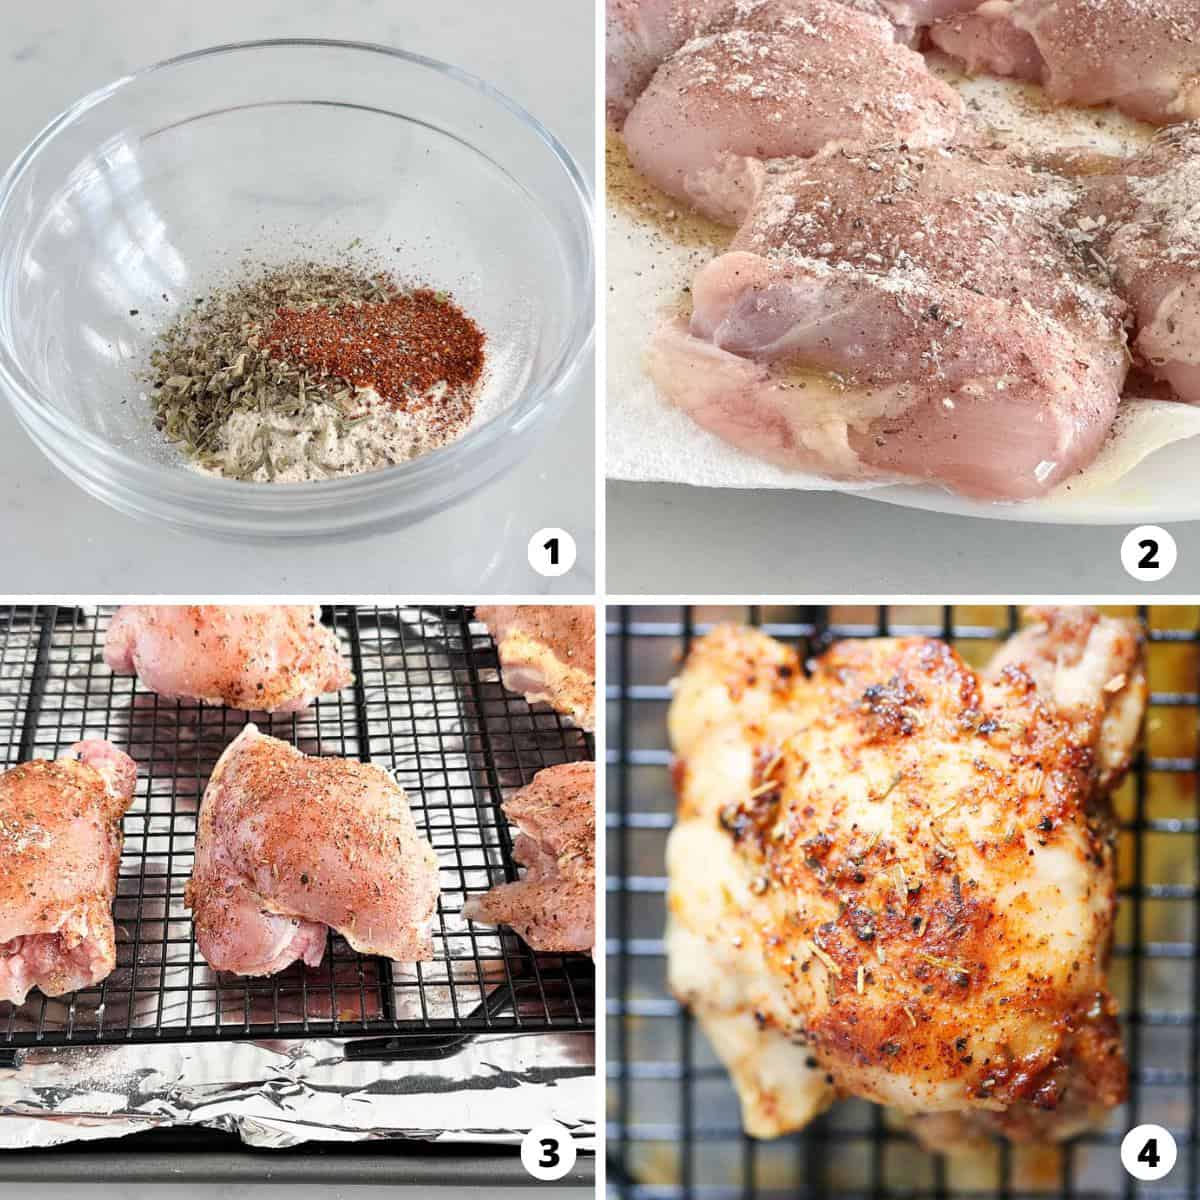 Showing how to bake chicken thighs in a 4 step collage.